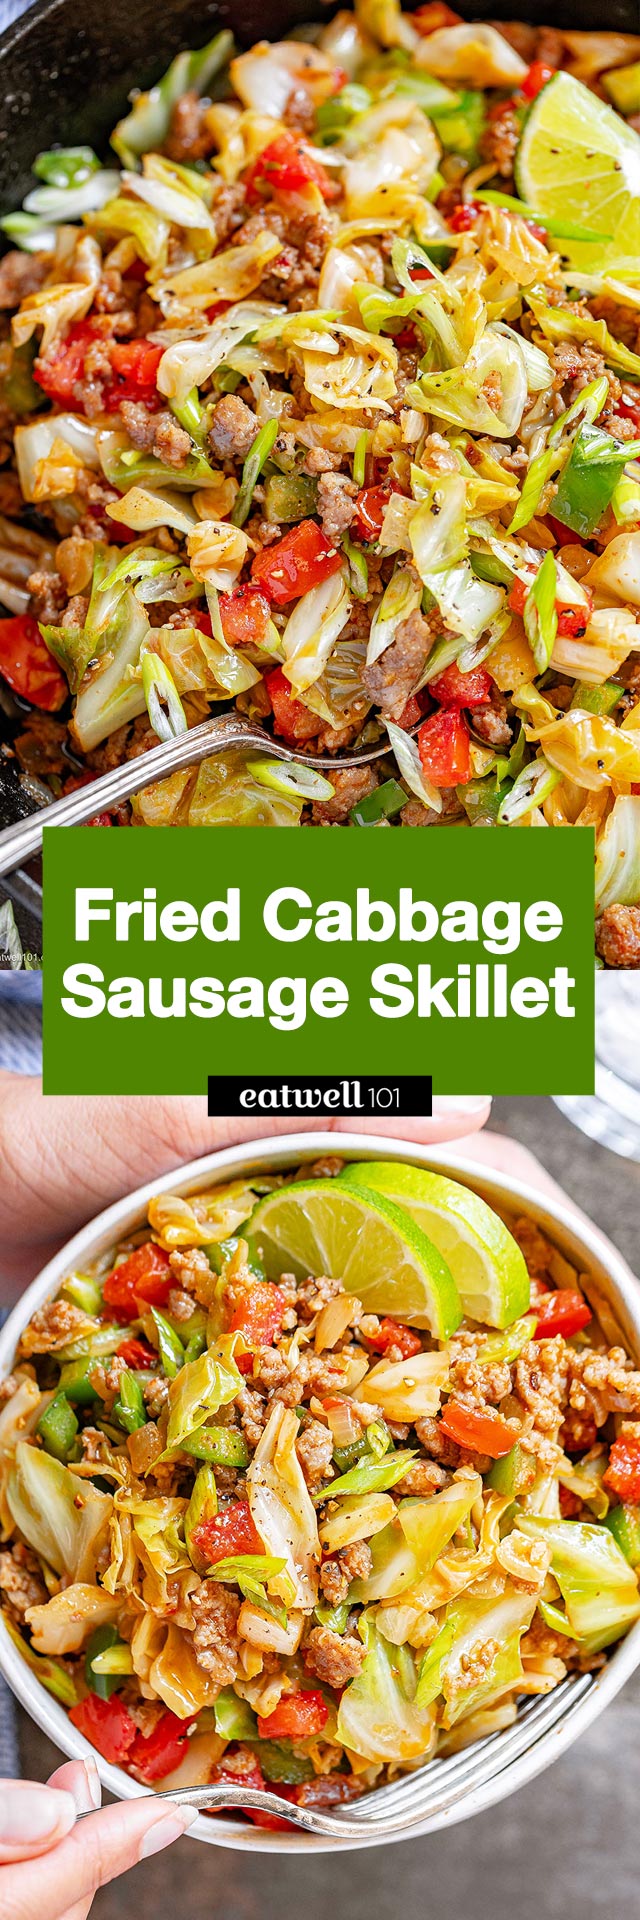 Fried Cabbage Sausage Skillet Recipe — Eatwell101